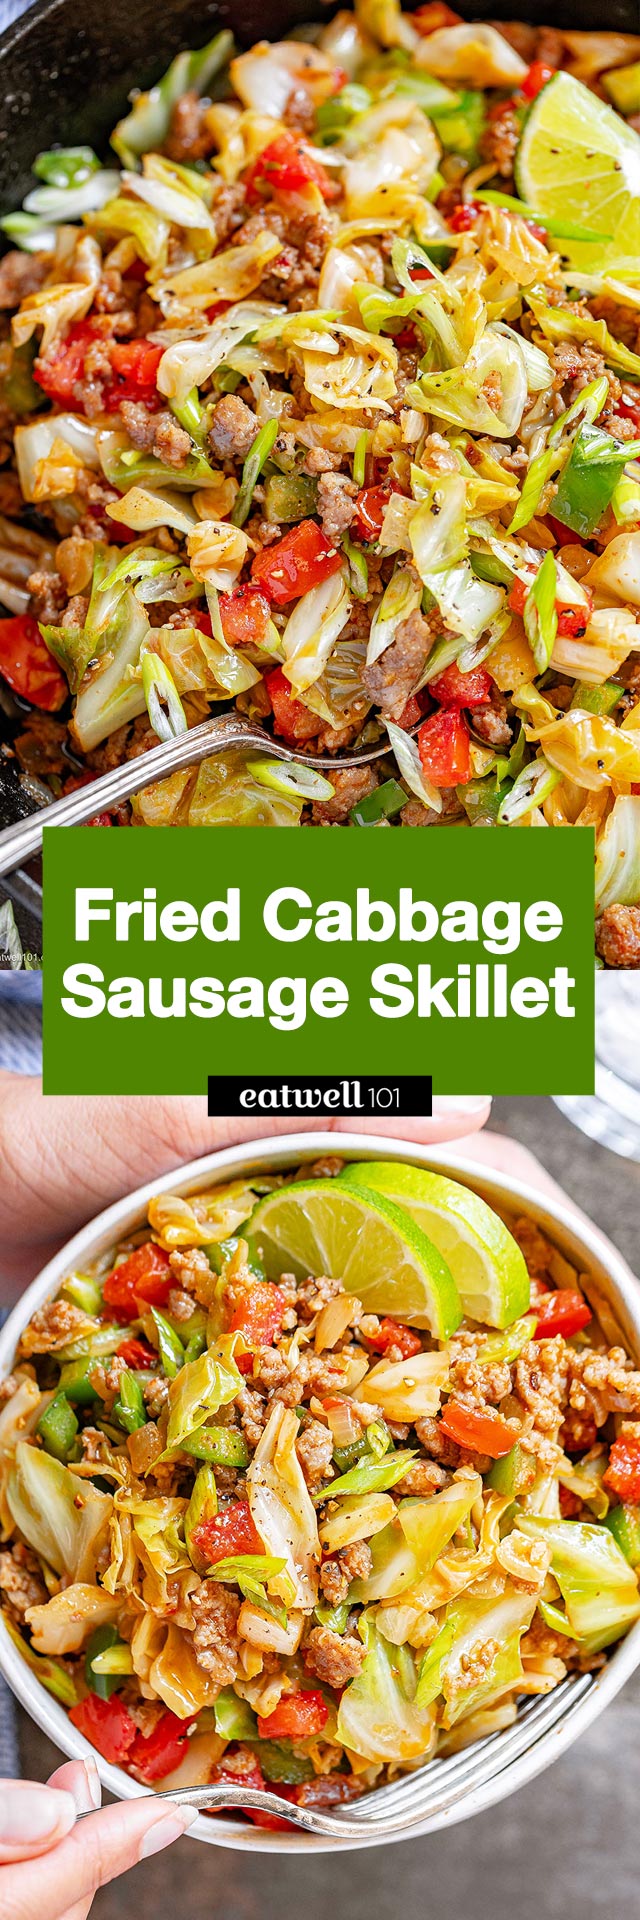 Fried Cabbage Sausage Skillet Recipe — Eatwell101